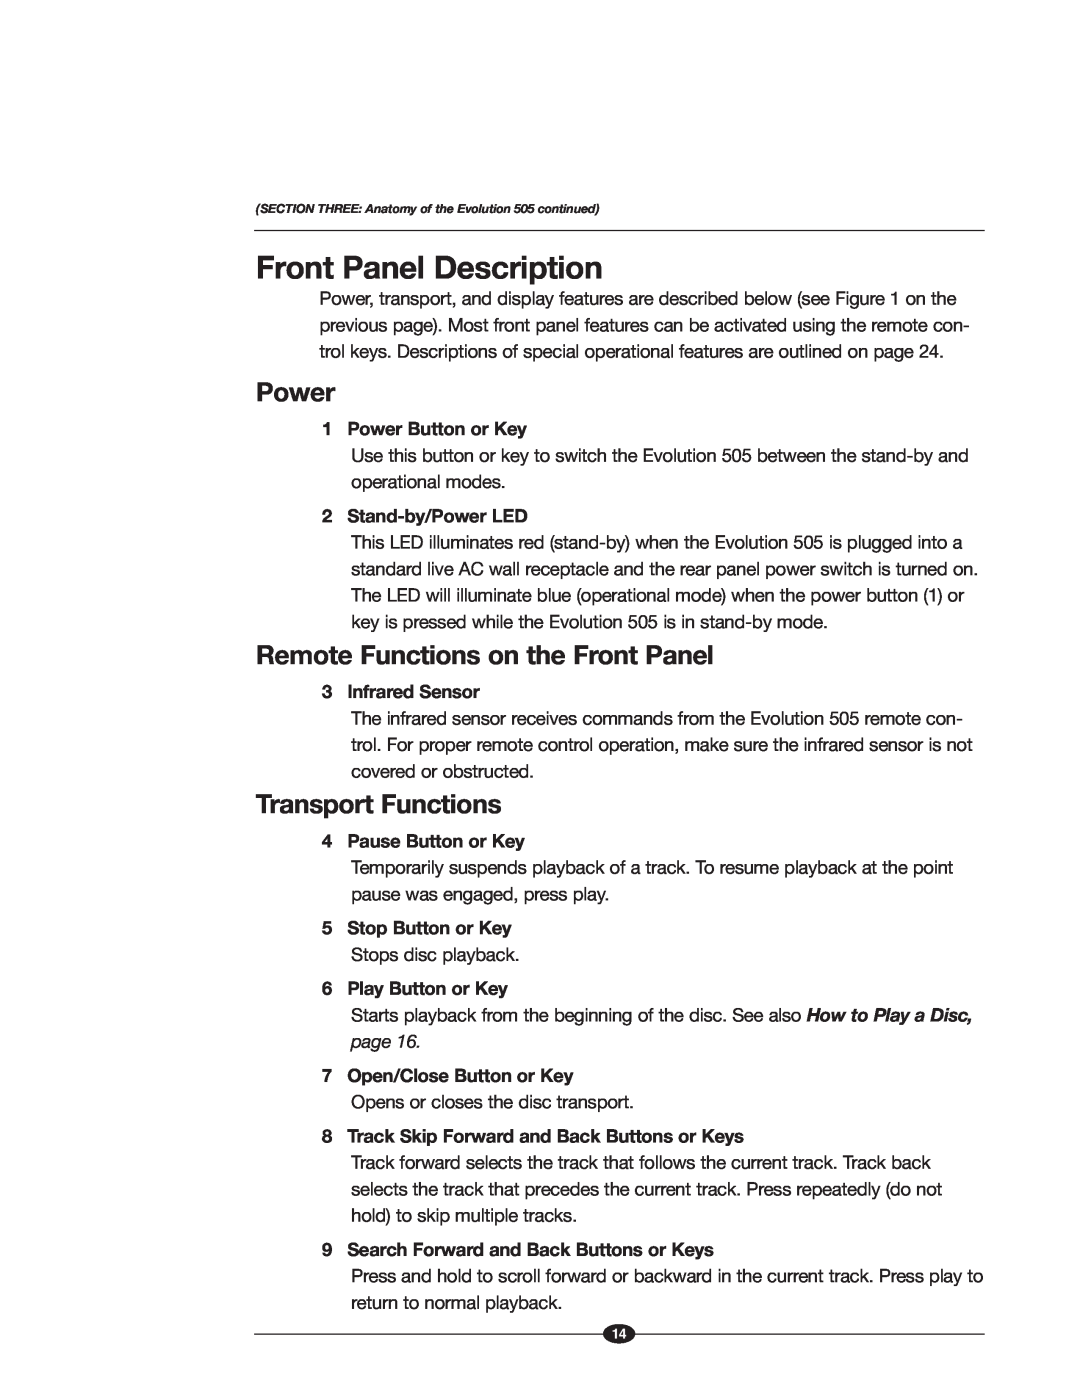 Krell Industries 505 manual Front Panel Description, Power, Remote Functions on the Front Panel, Transport Functions 